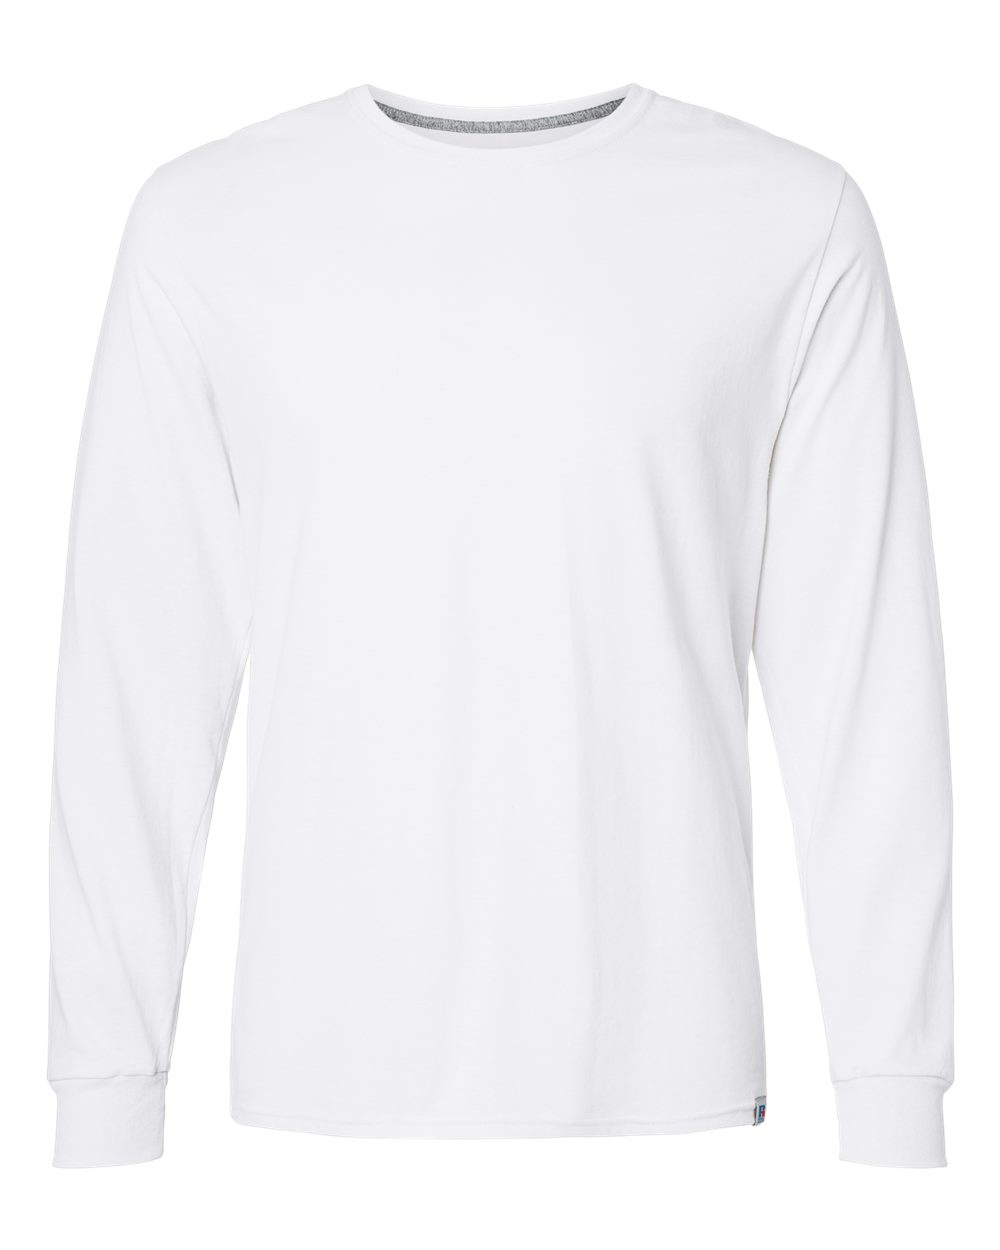 russell athletic long sleeve tee shirts